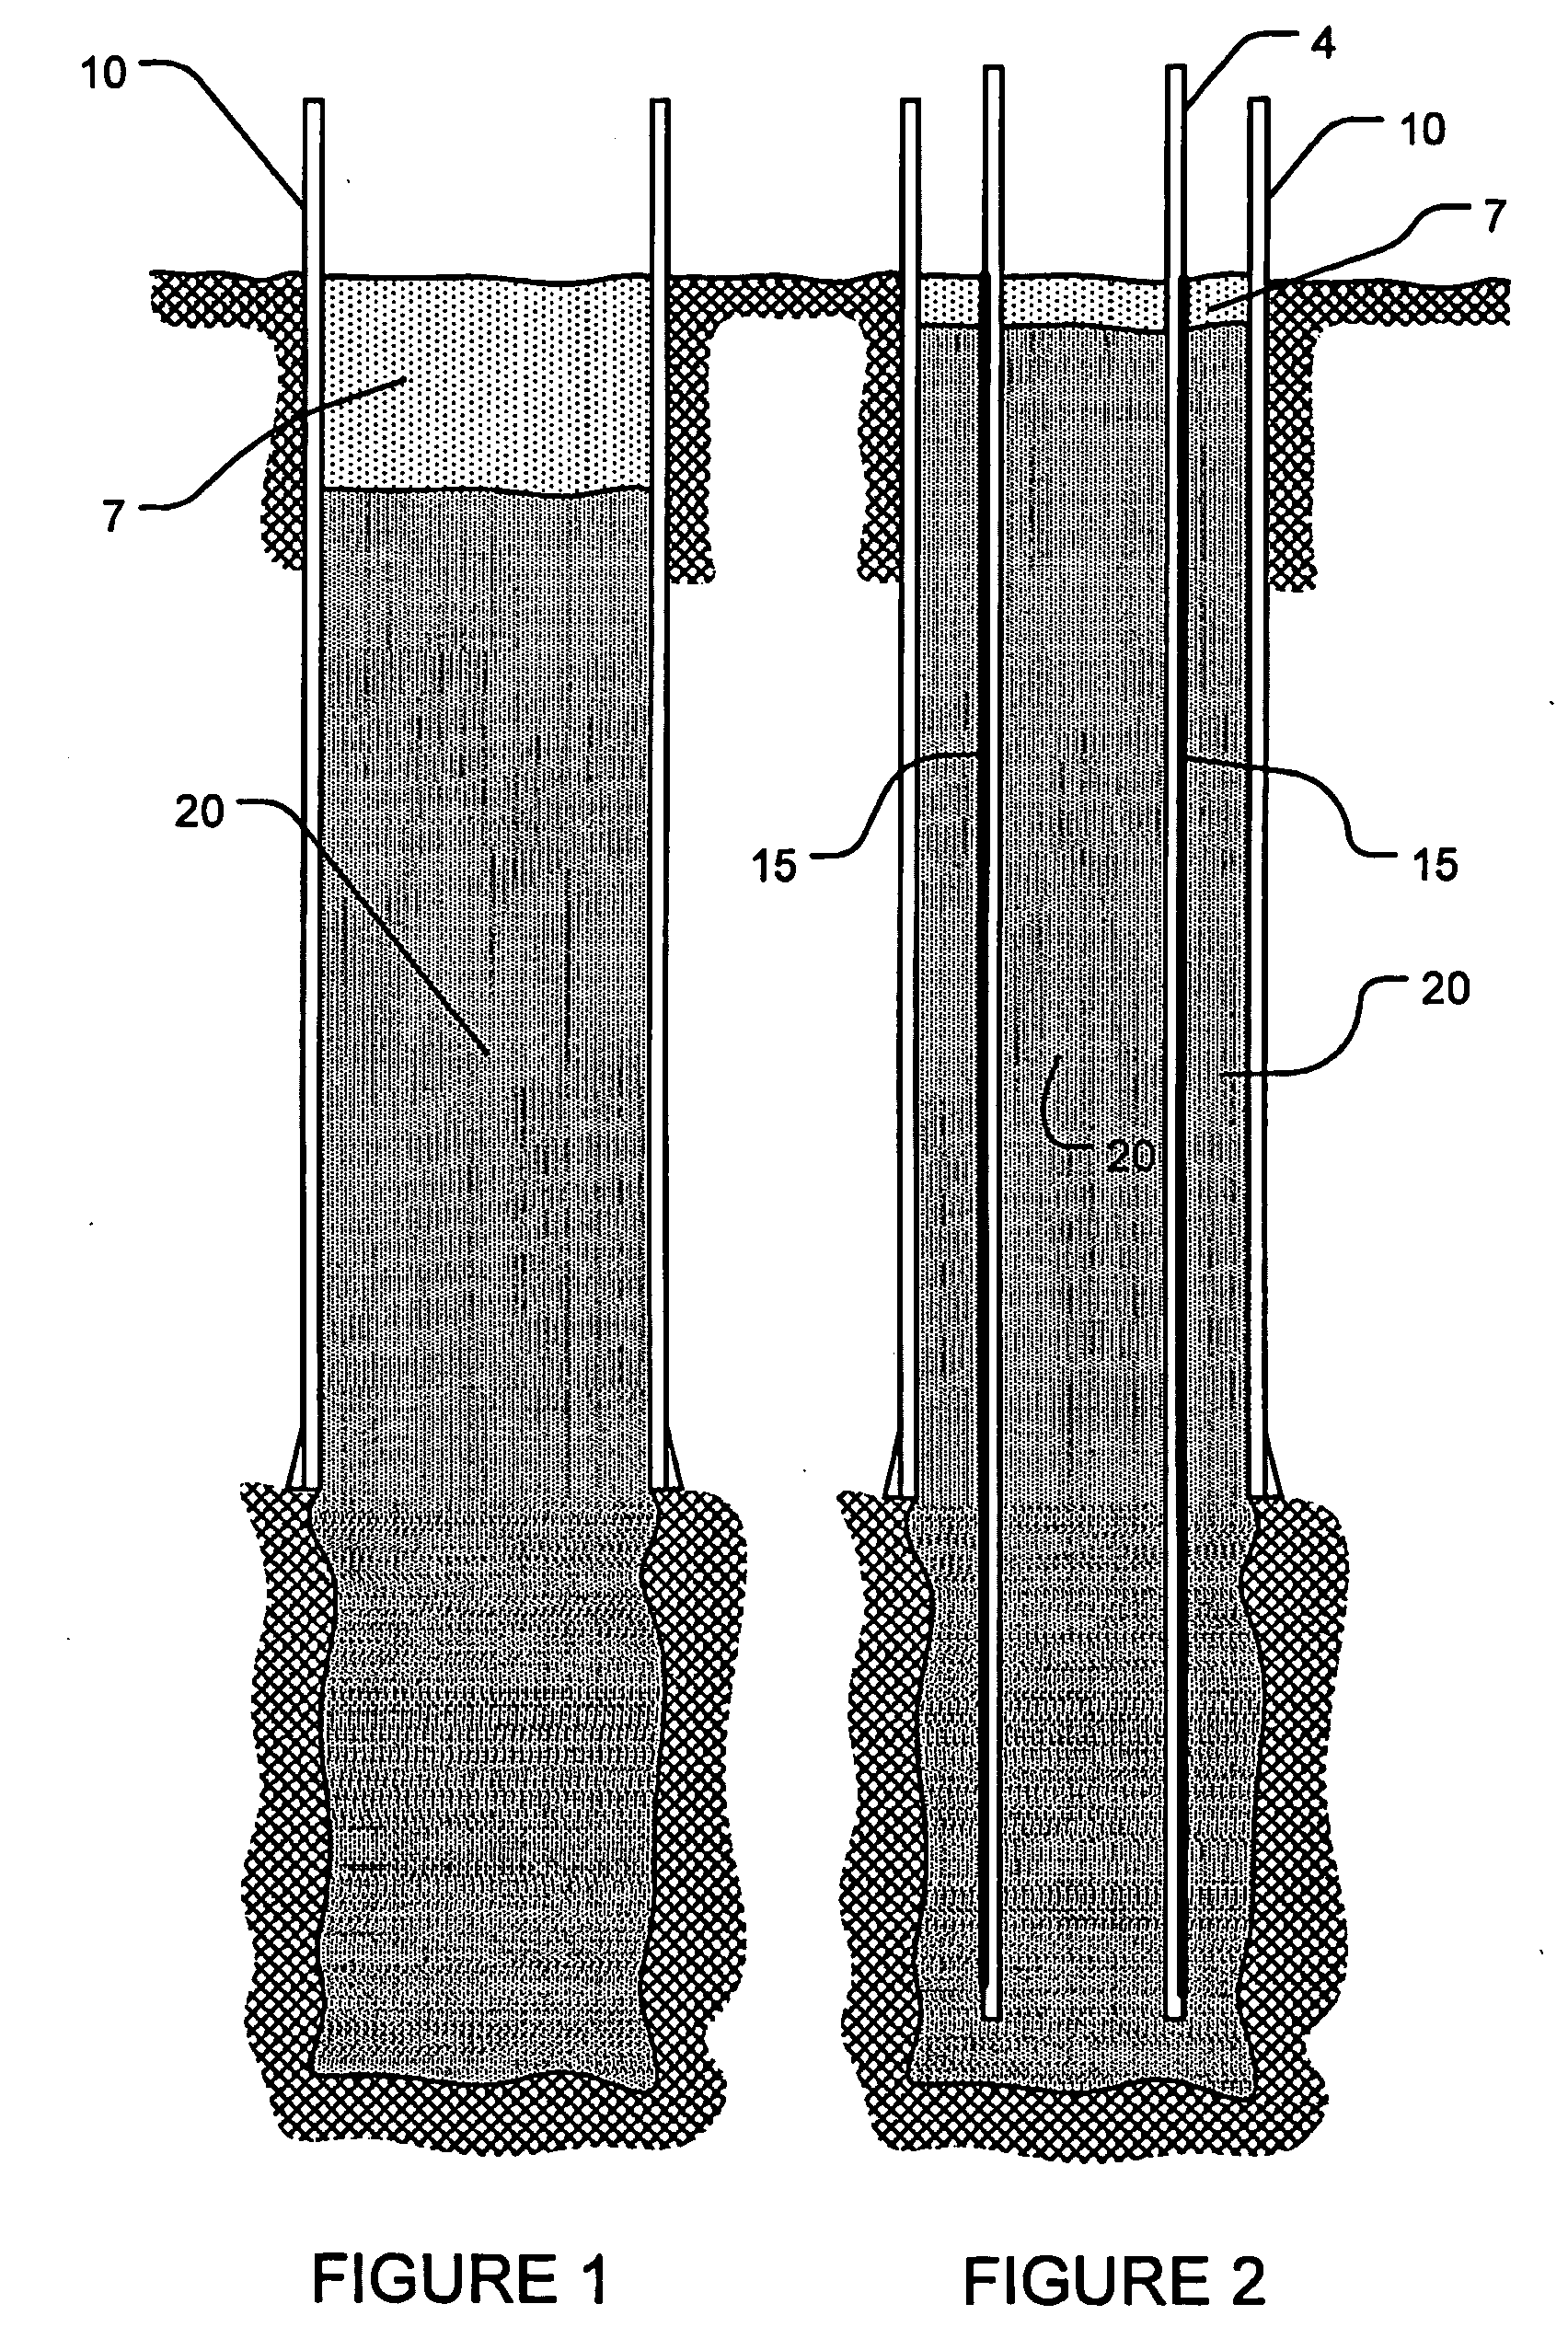 Casing strings and methods of using such strings in subterranean cementing operations